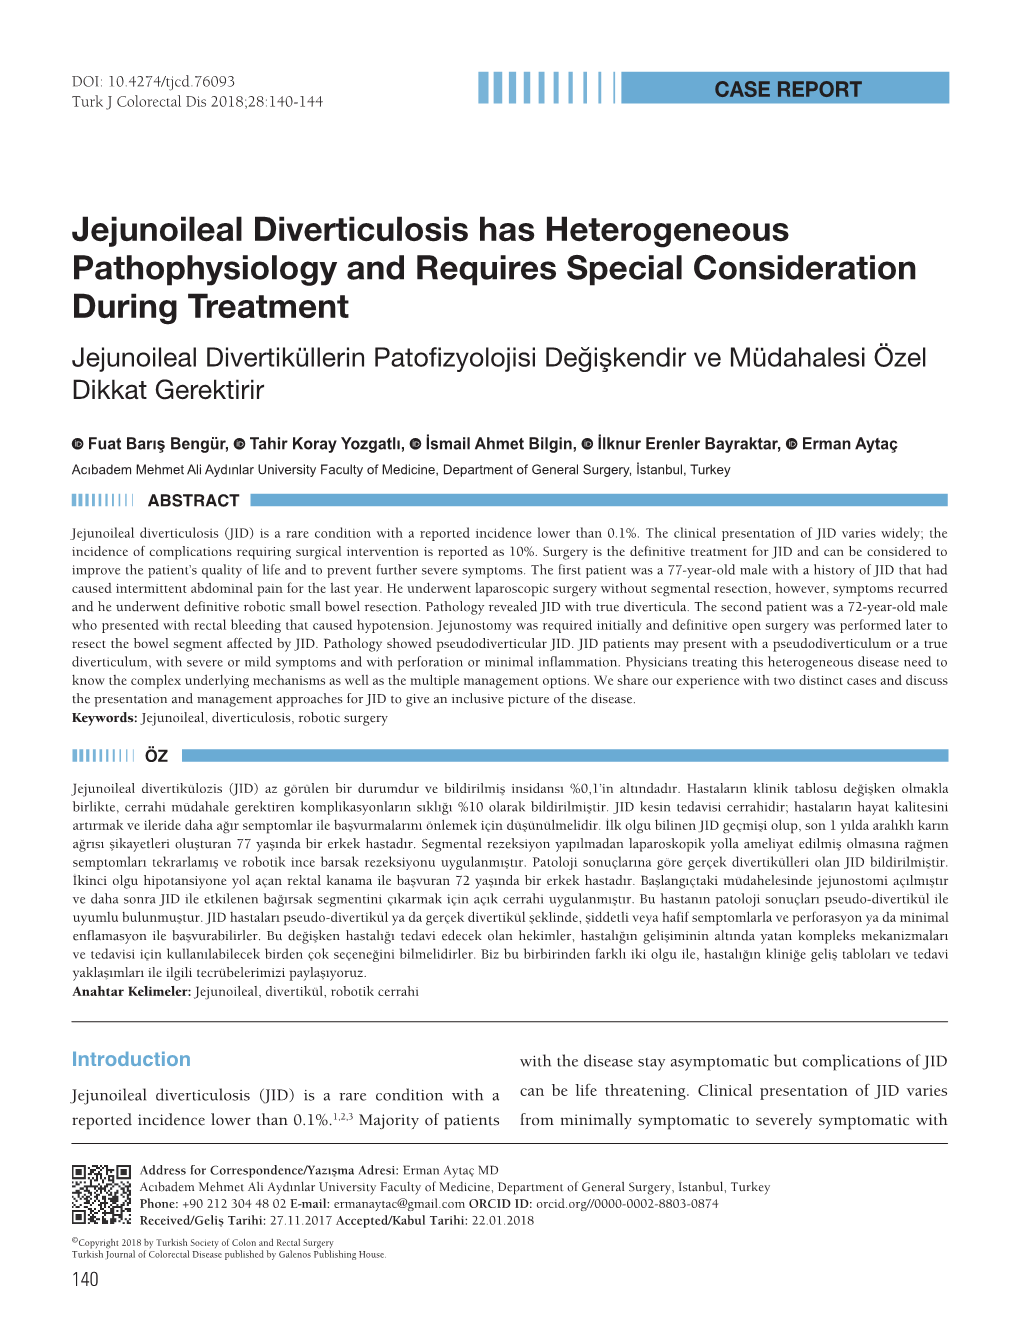 Jejunoileal Diverticulosis Has Heterogeneous Pathophysiology